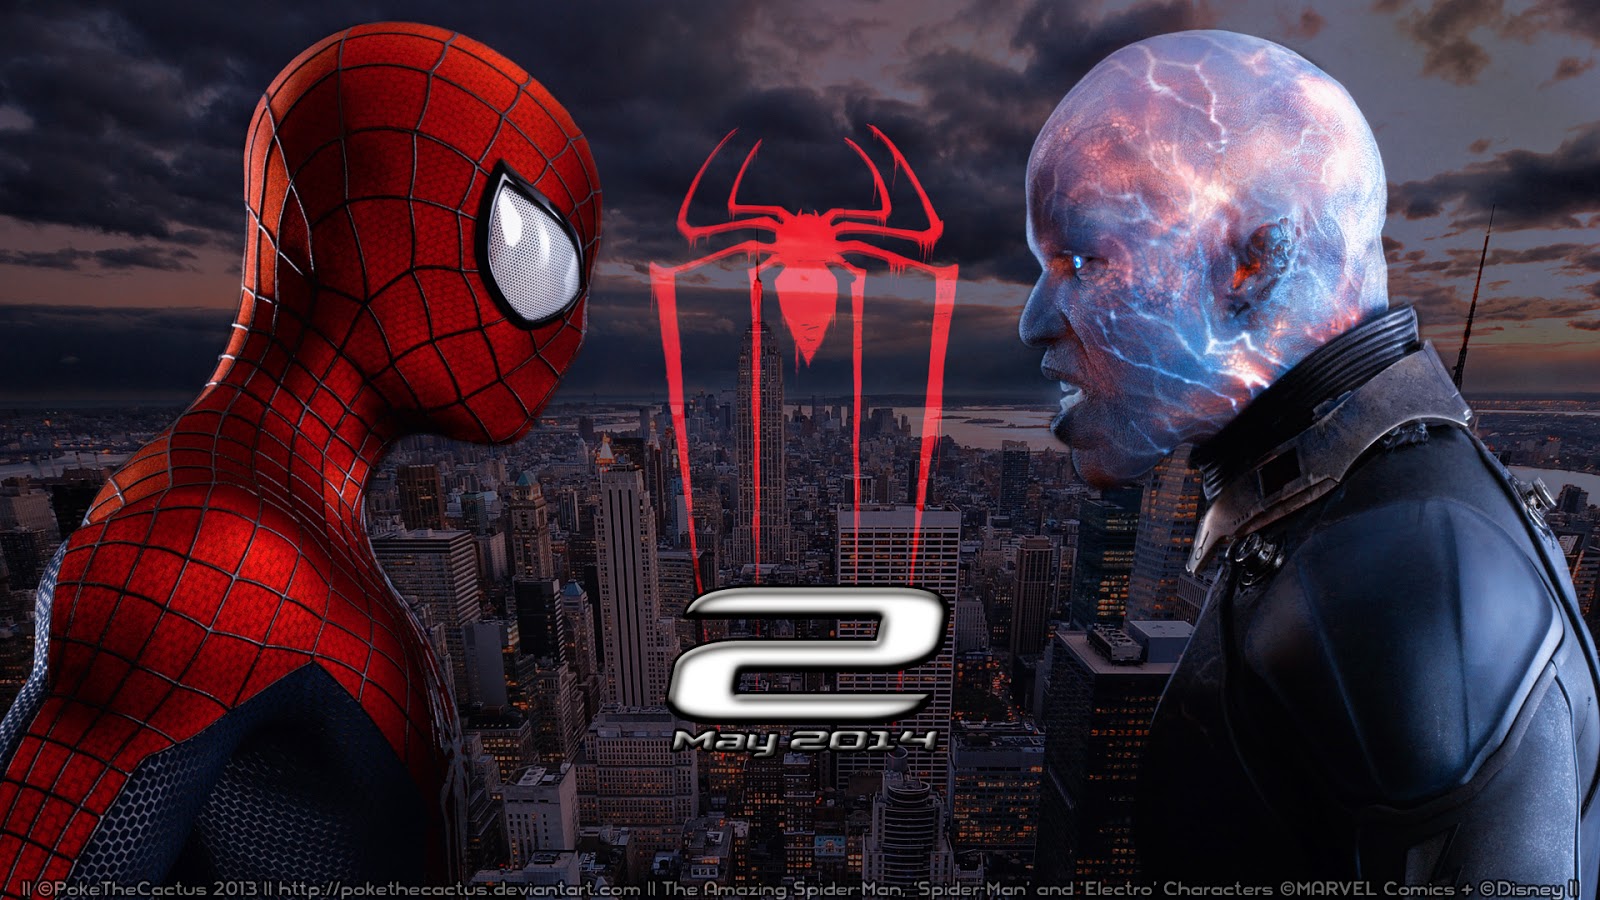 Pictures of Amazing Spiderman 2 Movie Wallpaper HD